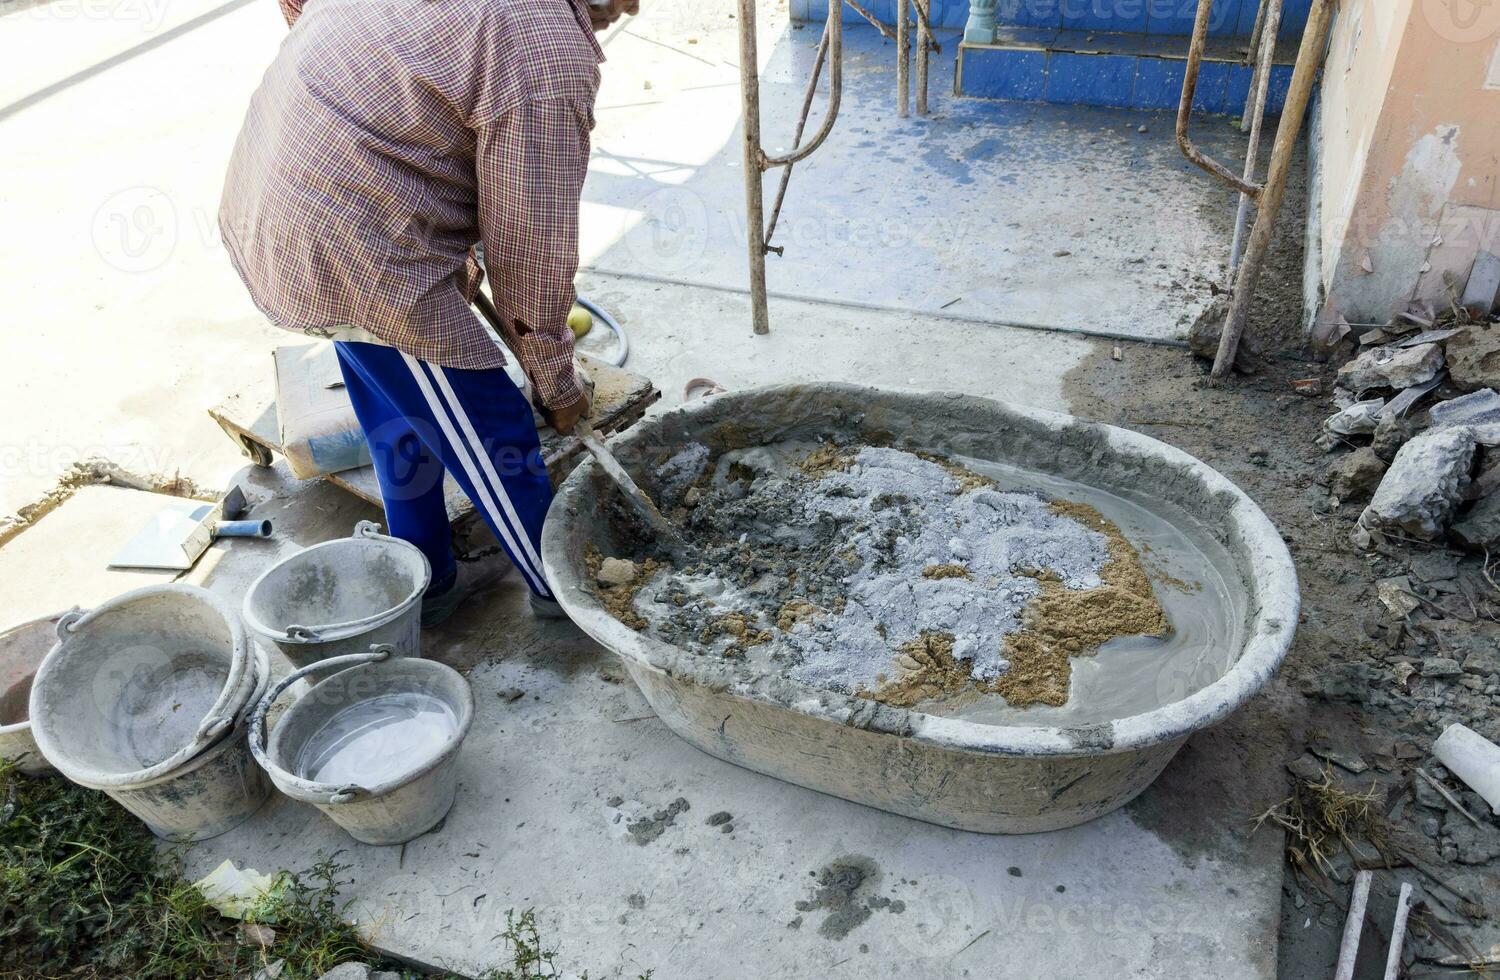 Worker mixing cement Concrete in a plastic container at a construction site Business of building houses, buildings, industry photo